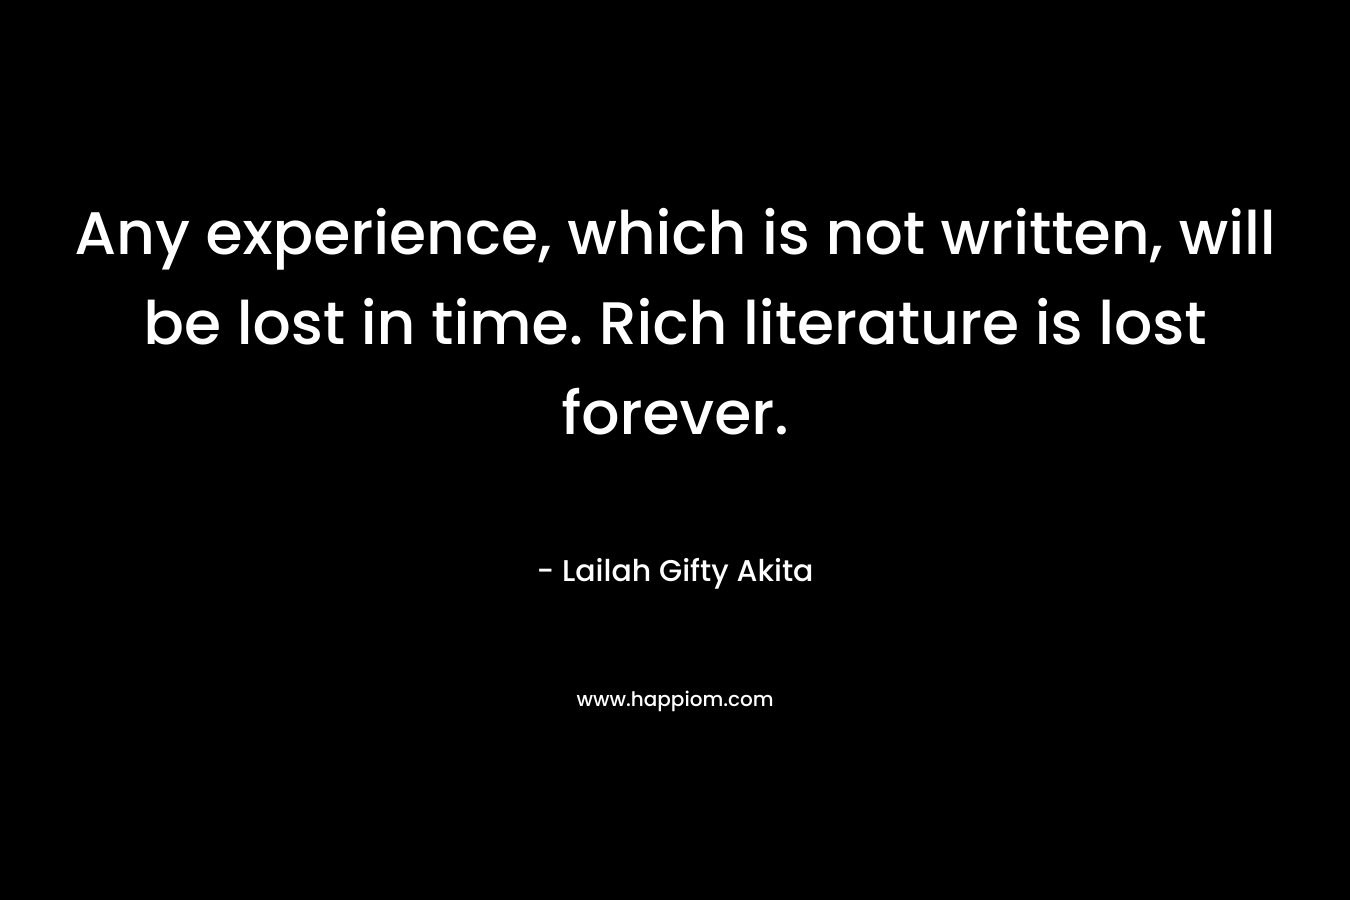 Any experience, which is not written, will be lost in time. Rich literature is lost forever.